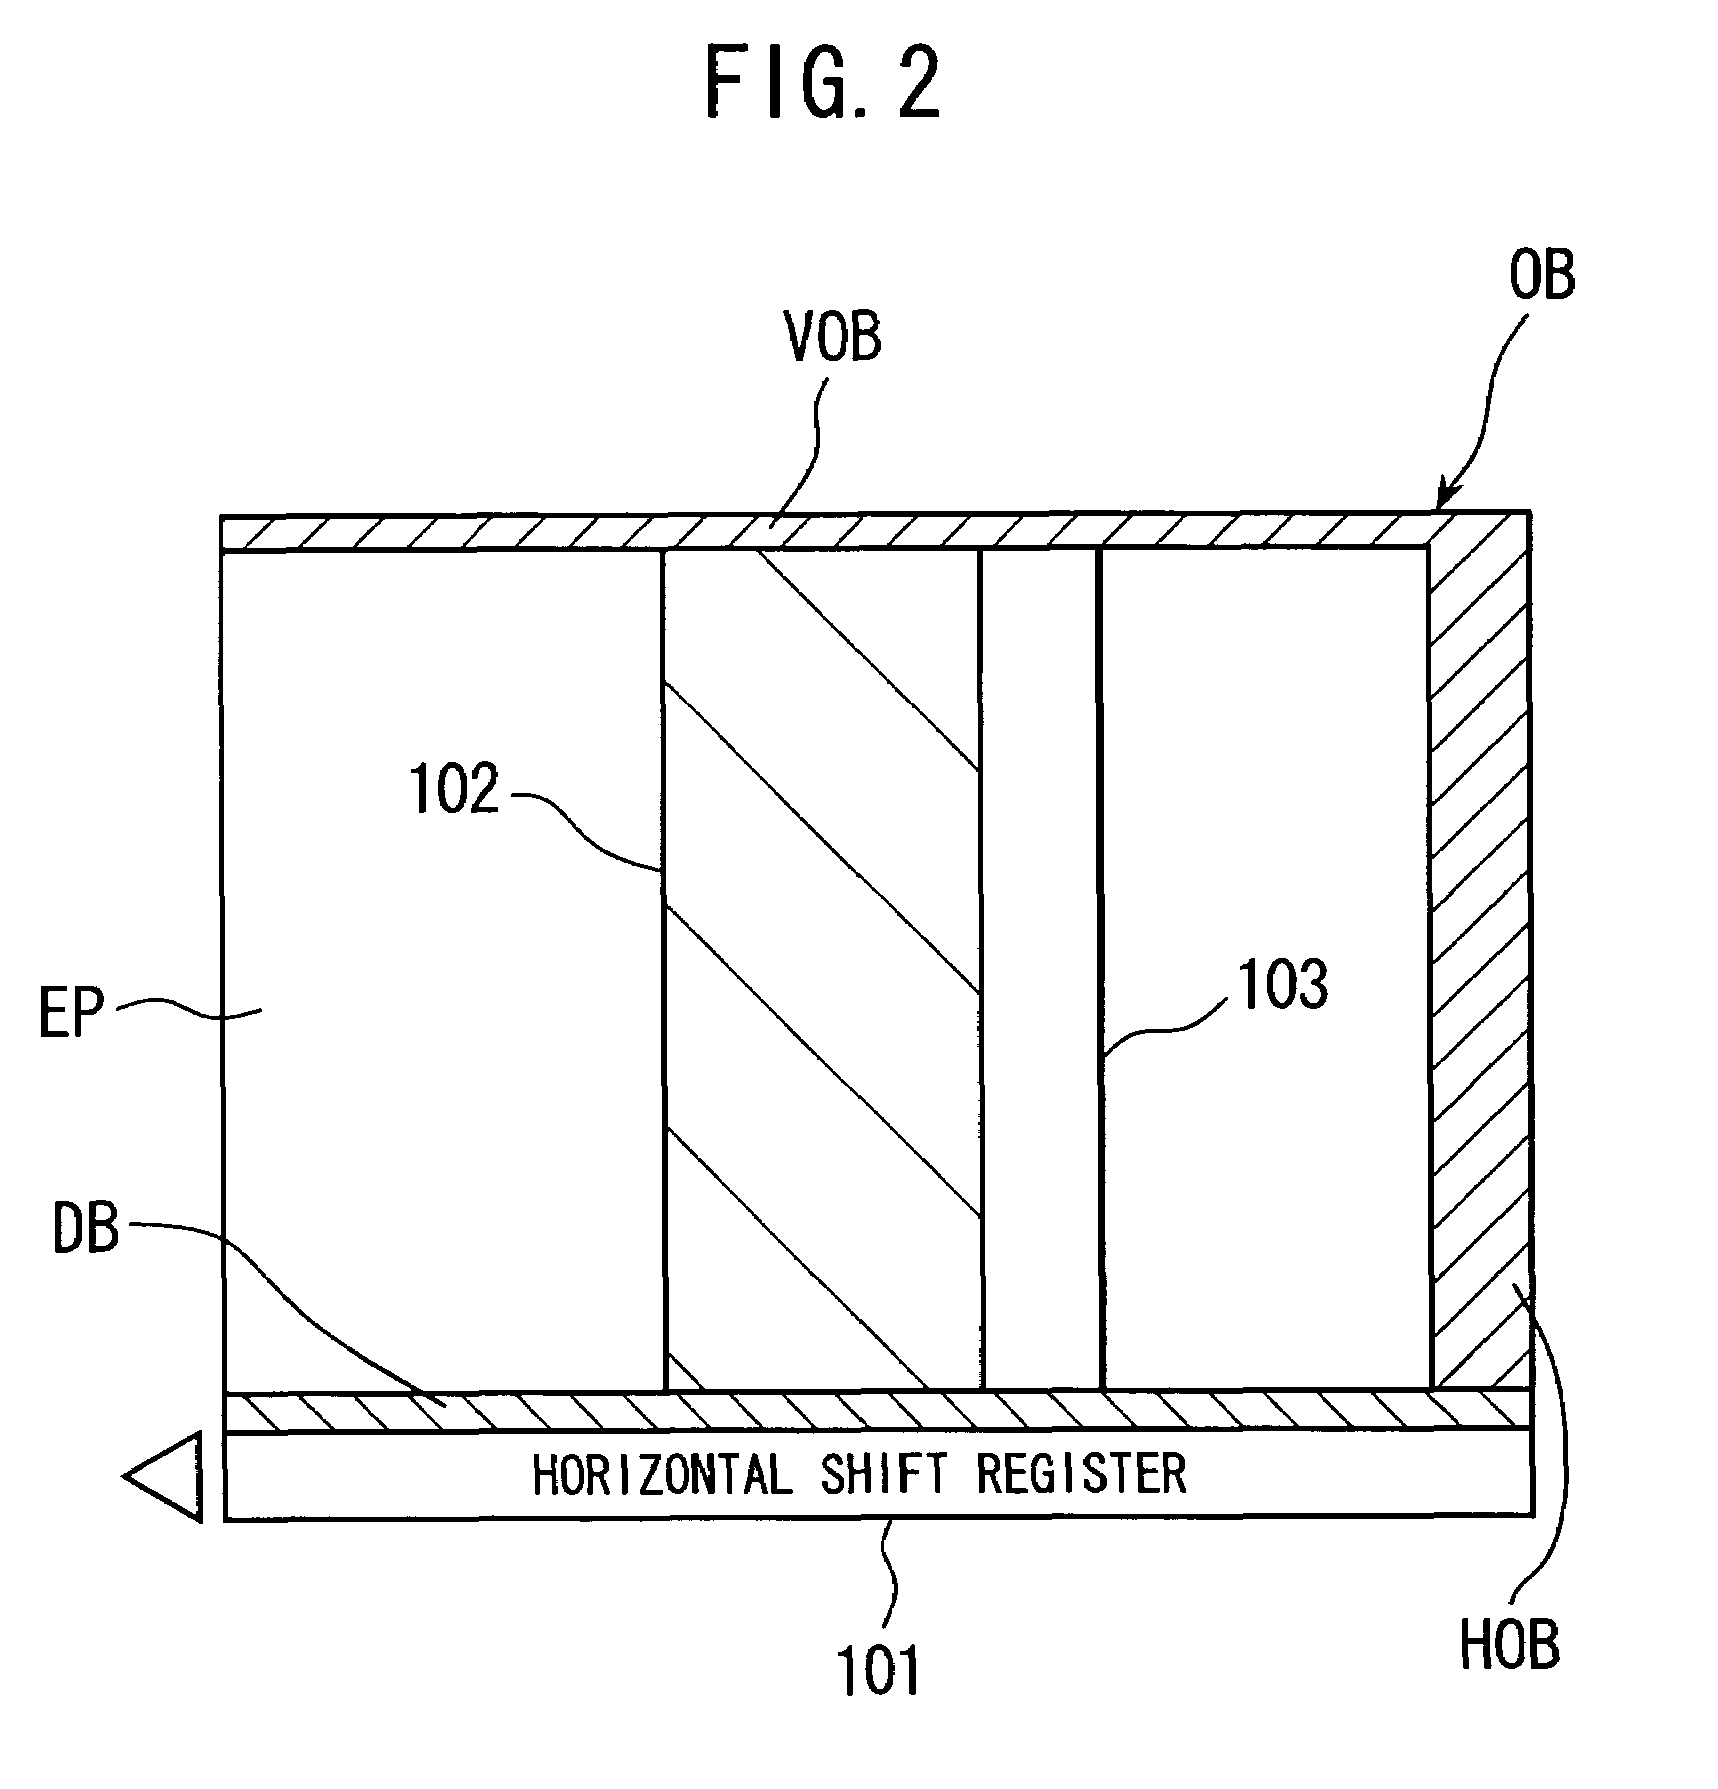 Electronic imaging apparatus operable in two modes with a different optical black correction procedure being effected in each mode